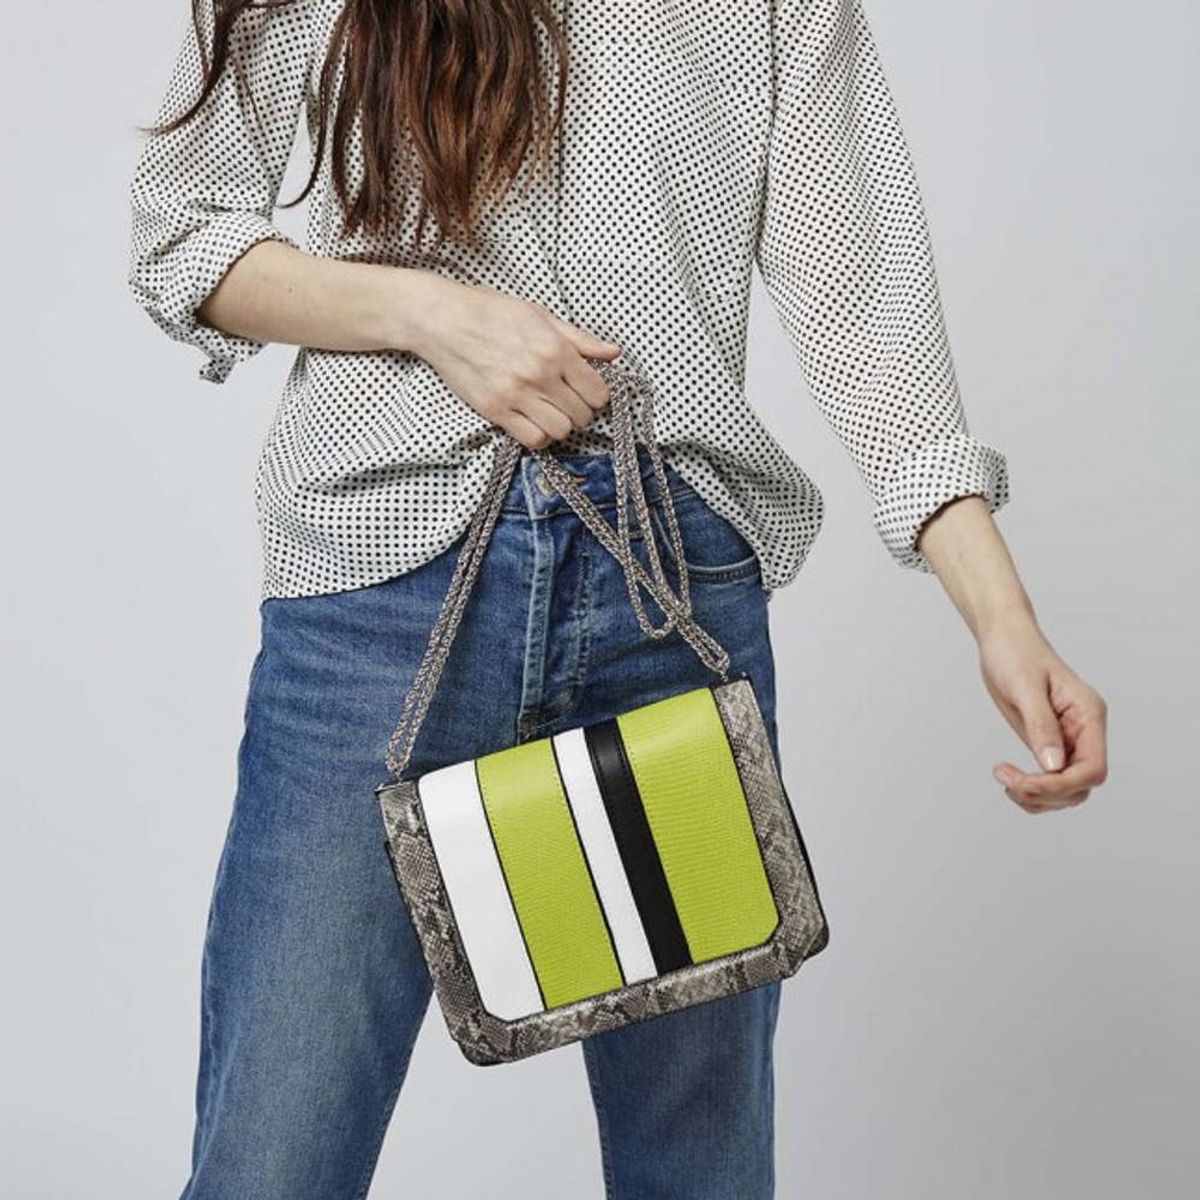 21 Trendy New Bags to Dress Up Your Spring Outfit